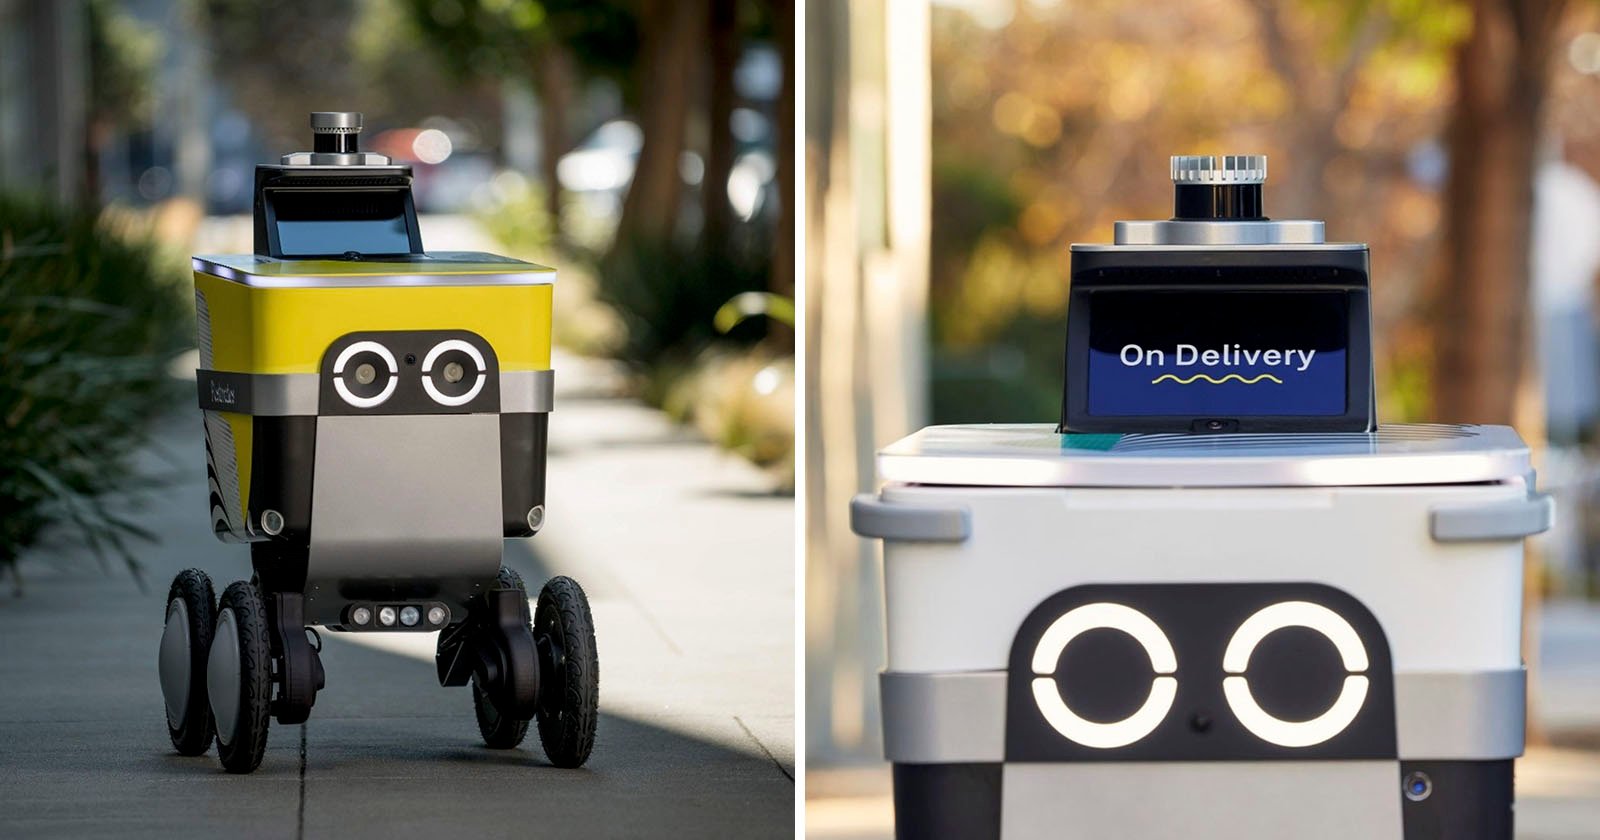 Food Delivery Robots Are Spying for Police While on the Job: Report